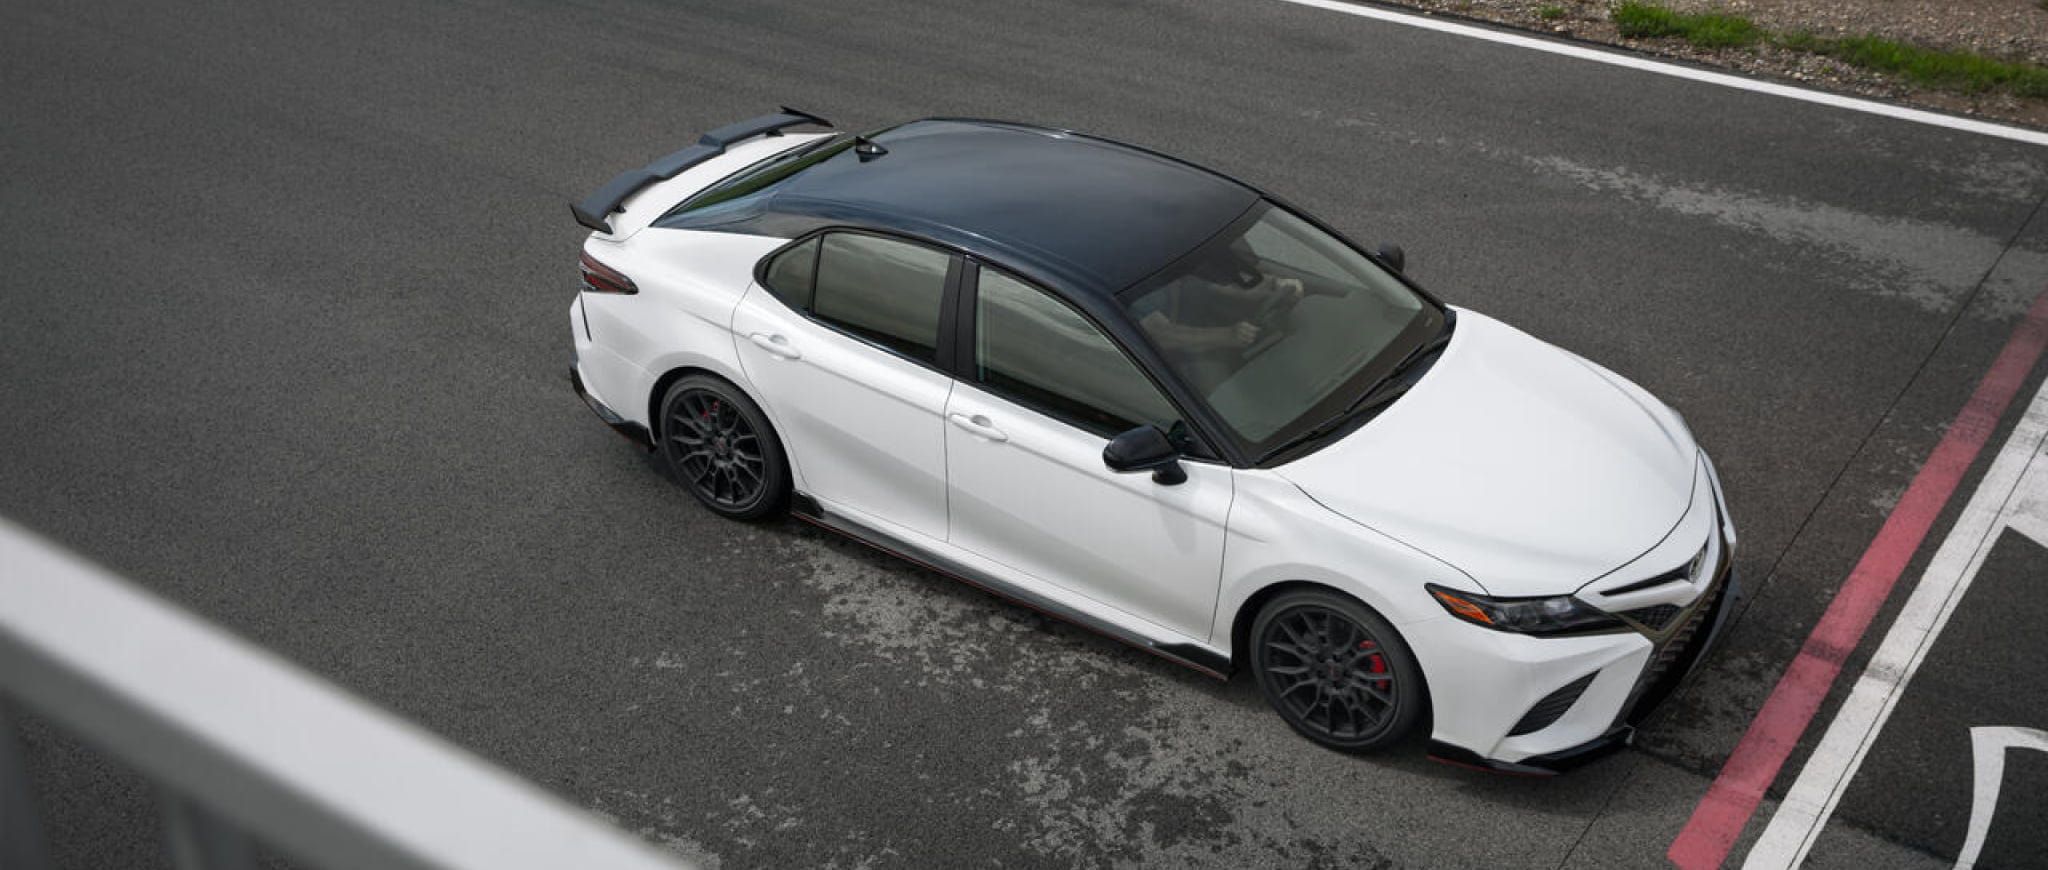 A white 2022 Camry TRD on a racetrack.